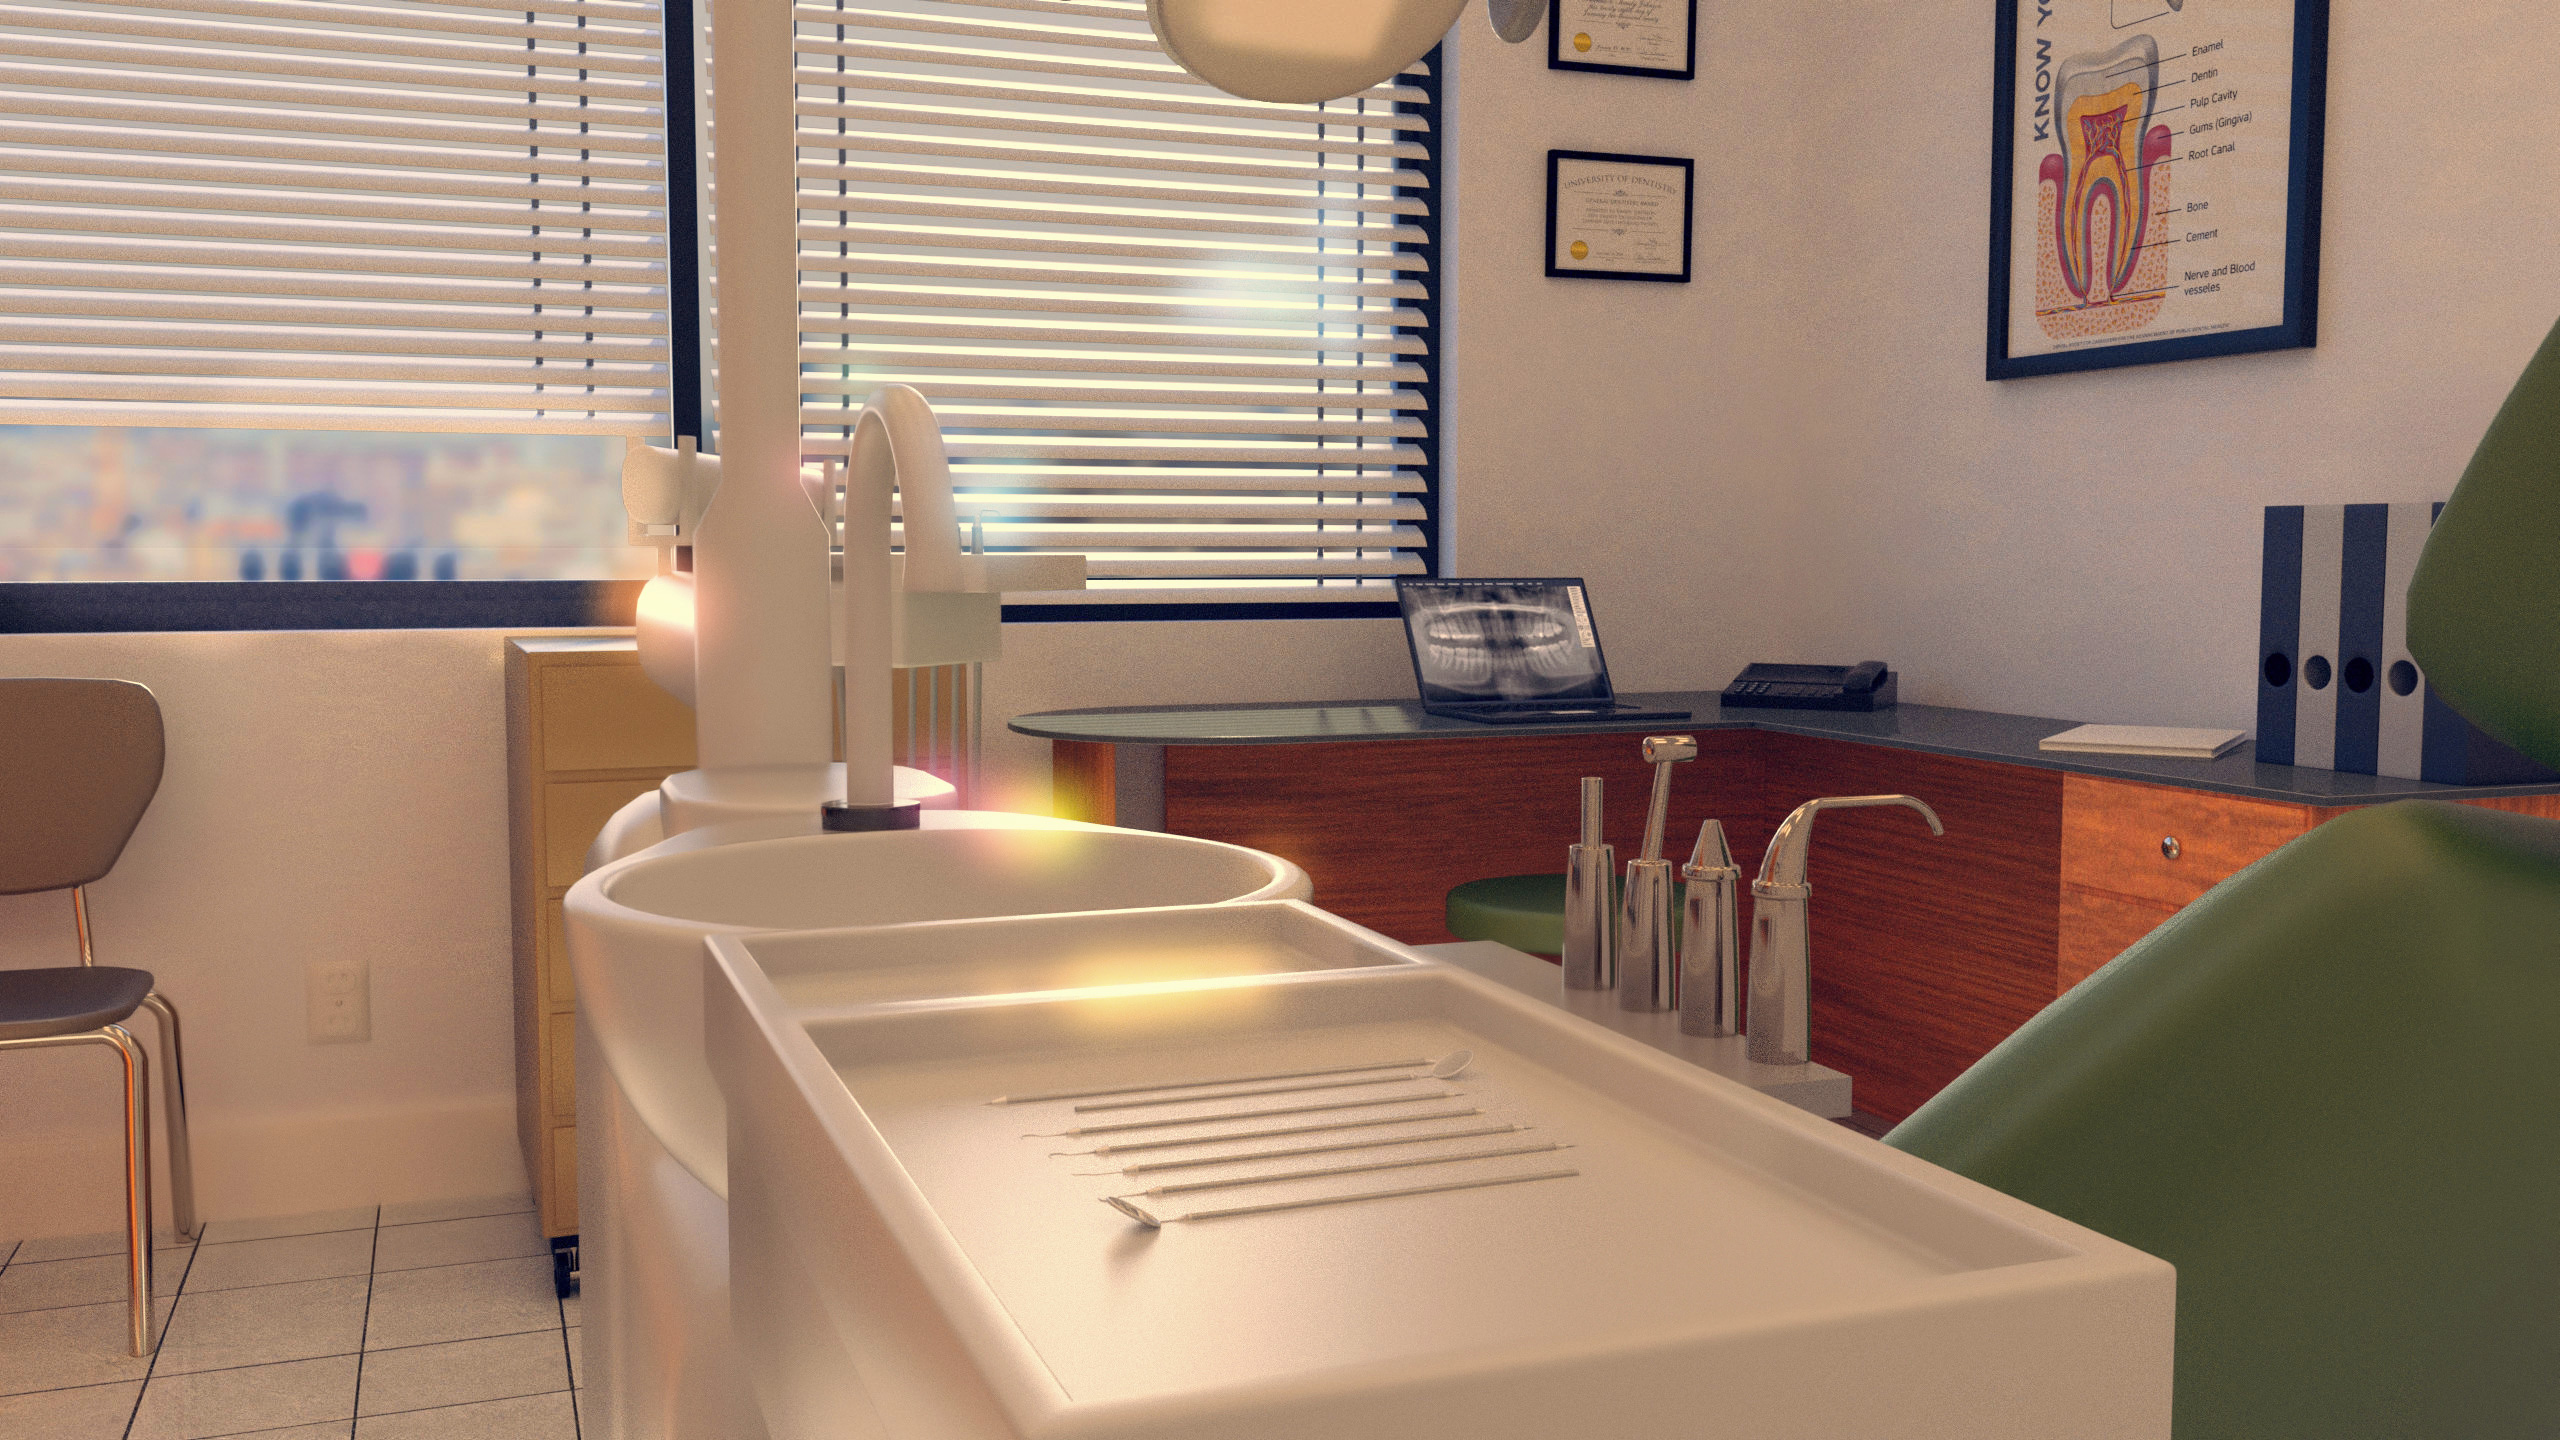 i13 Dental Office Interior by: ironman13, 3D Models by Daz 3D